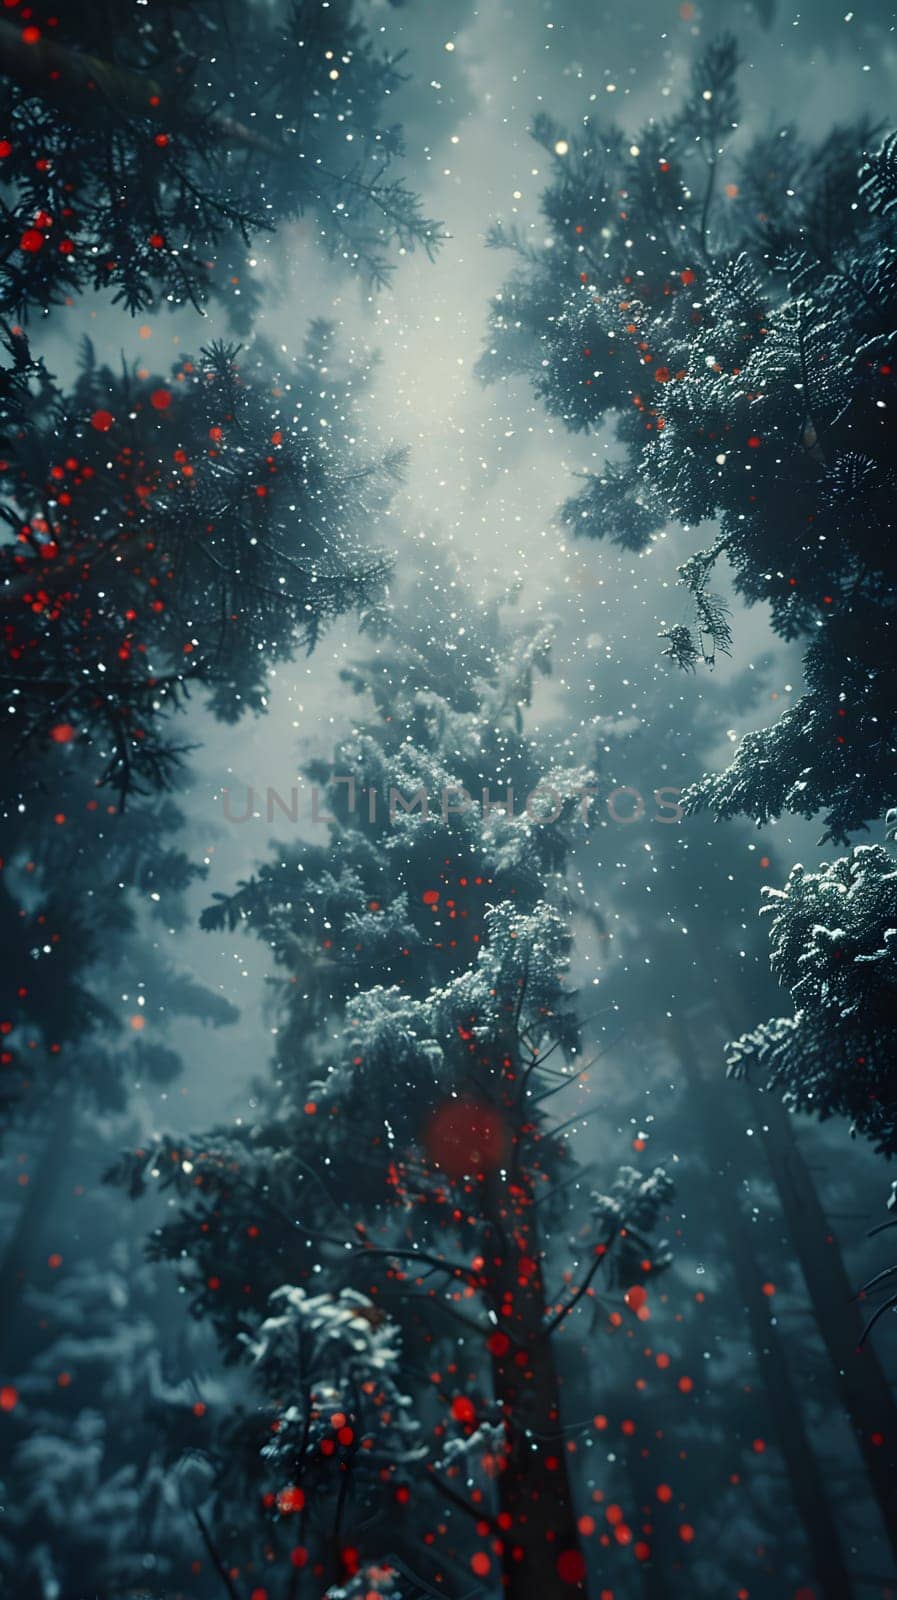 Snowcovered forest with red berries on trees, under dark sky by Nadtochiy